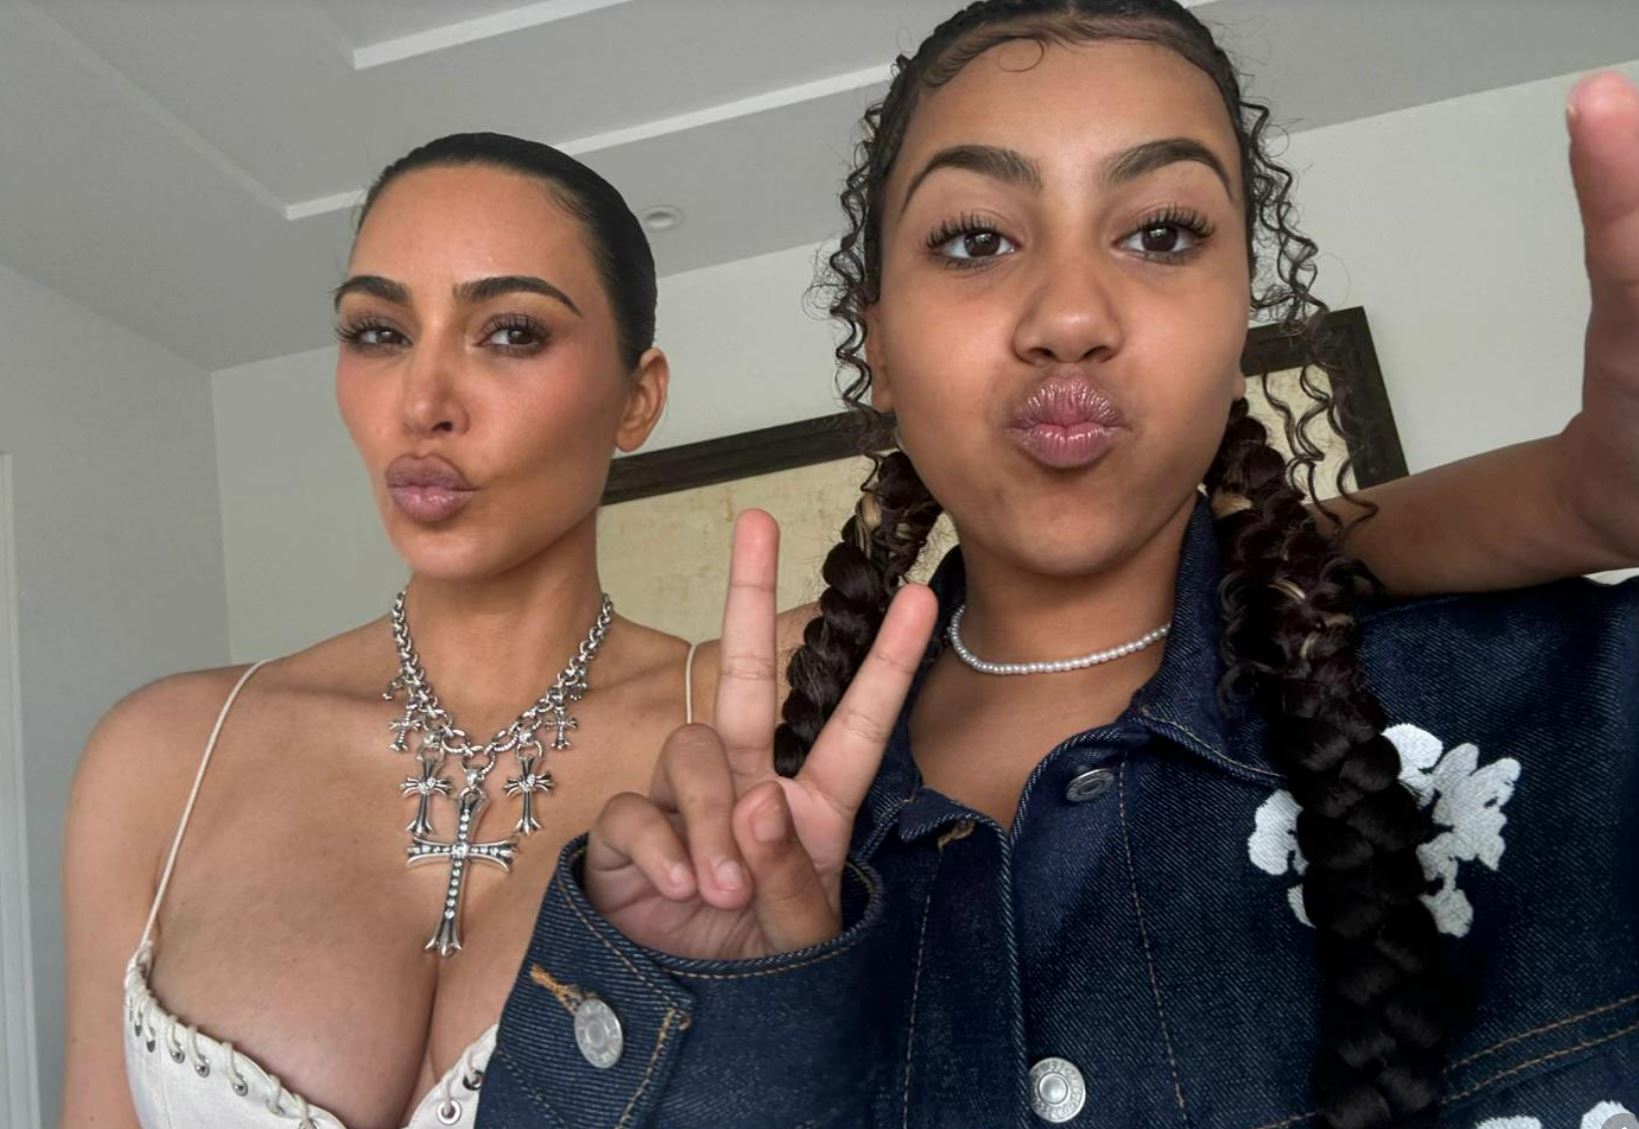 Fans claimed Kim had a 'wonky eye' in this selfie